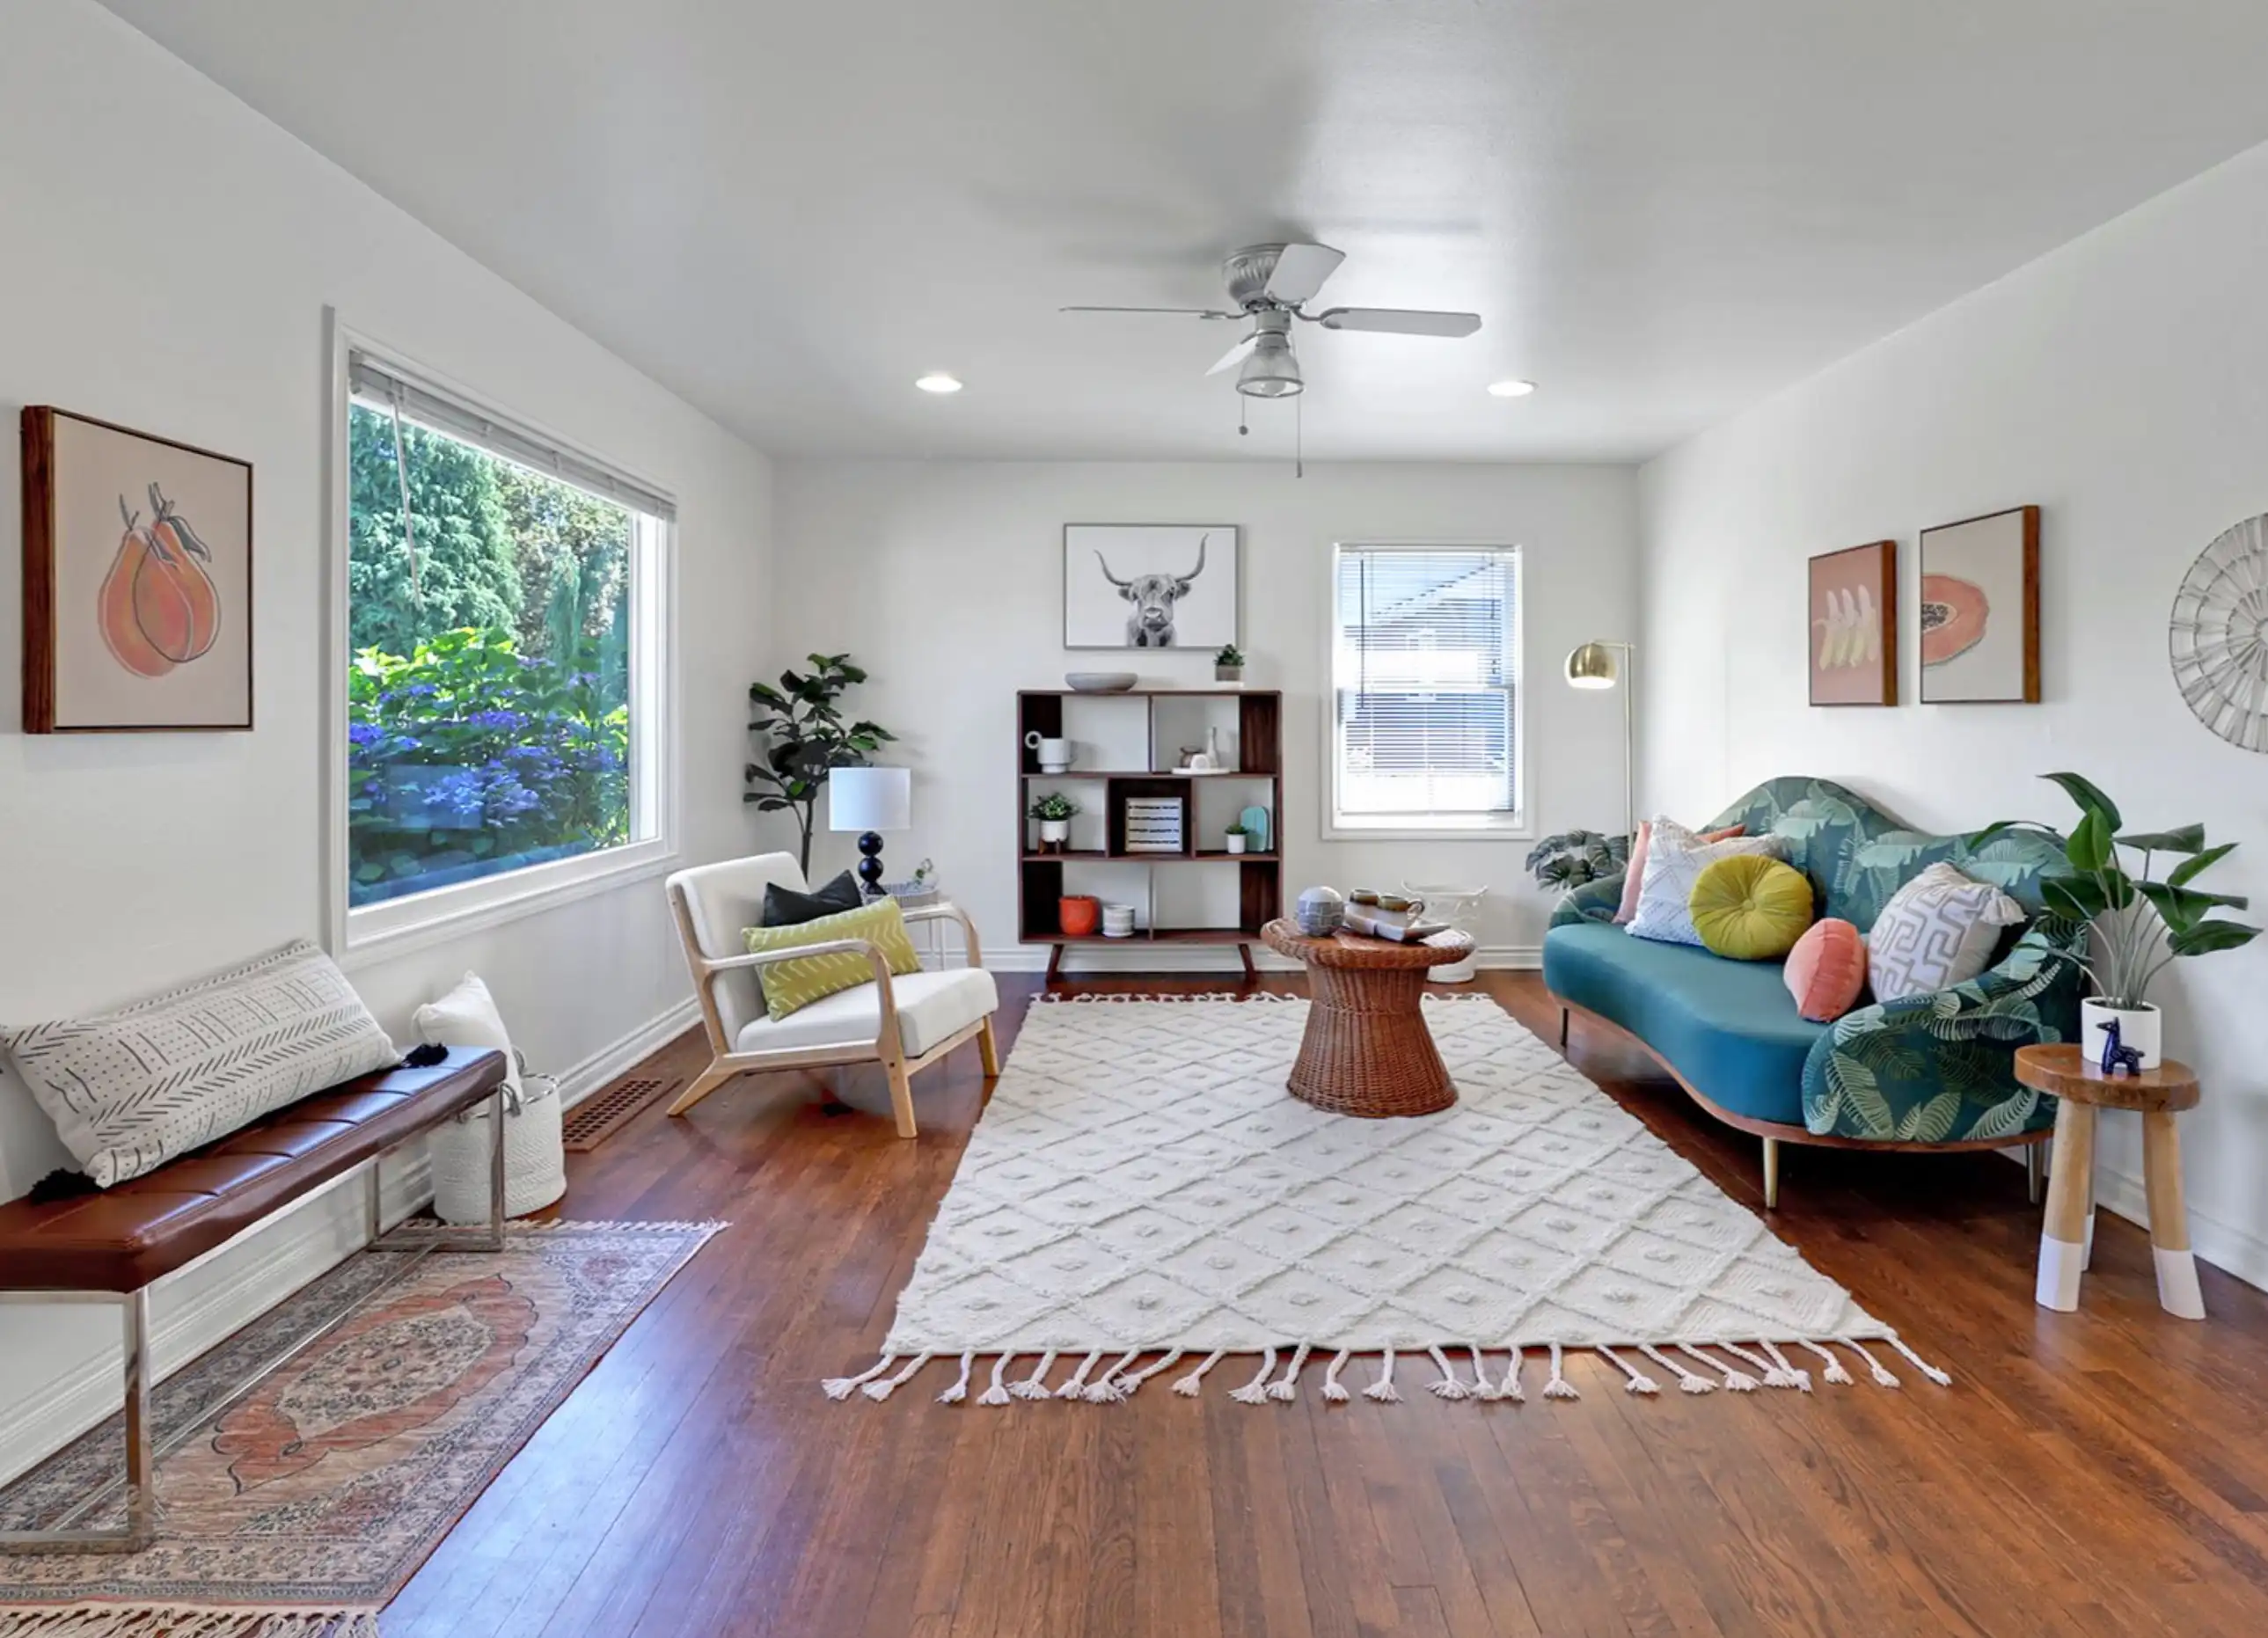 Example of staged home in Portland, Oregon